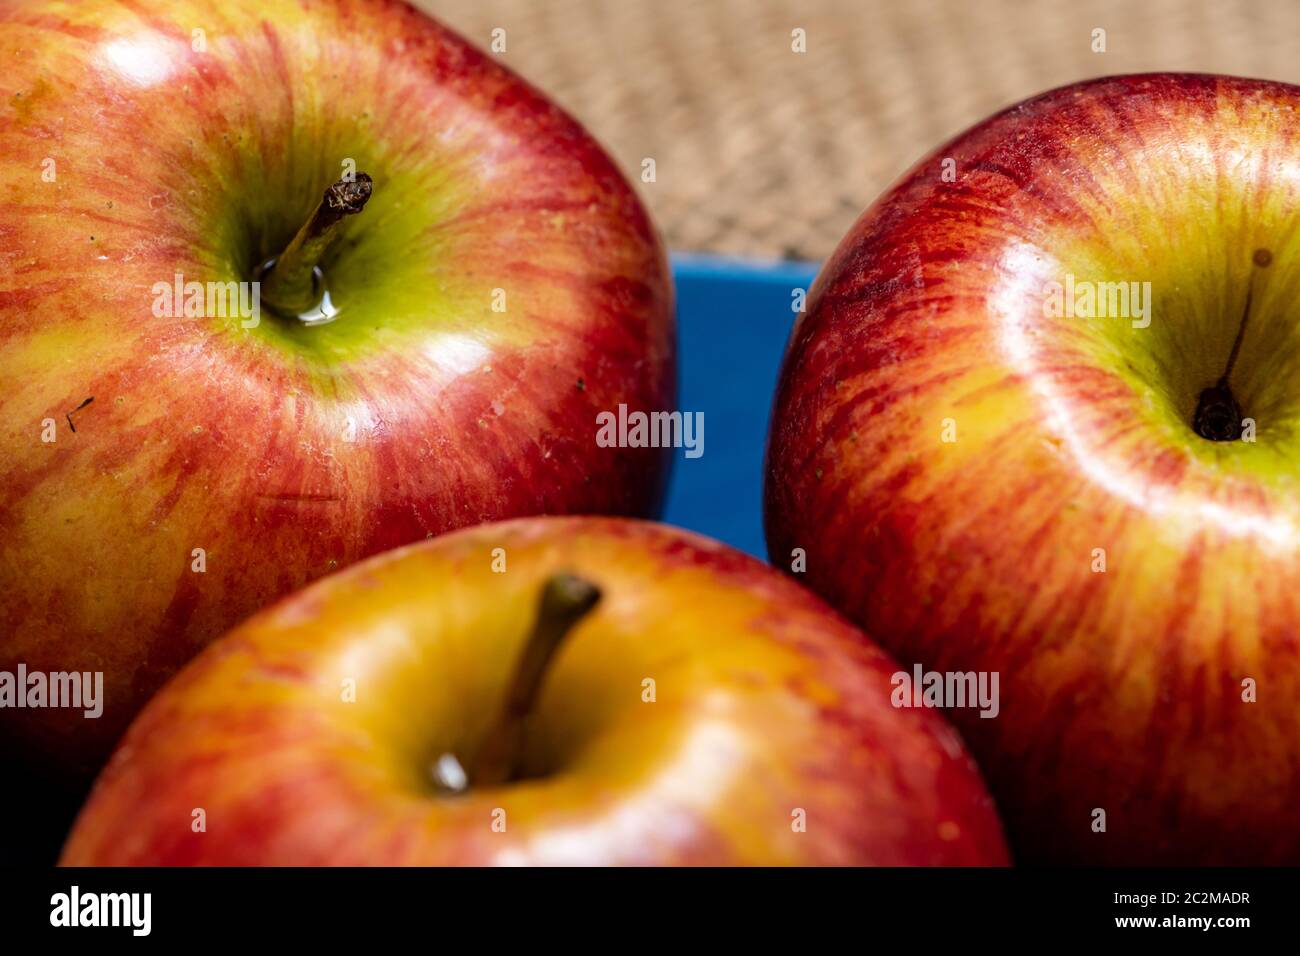 Rich wood-affected apples ready to eat Stock Photo